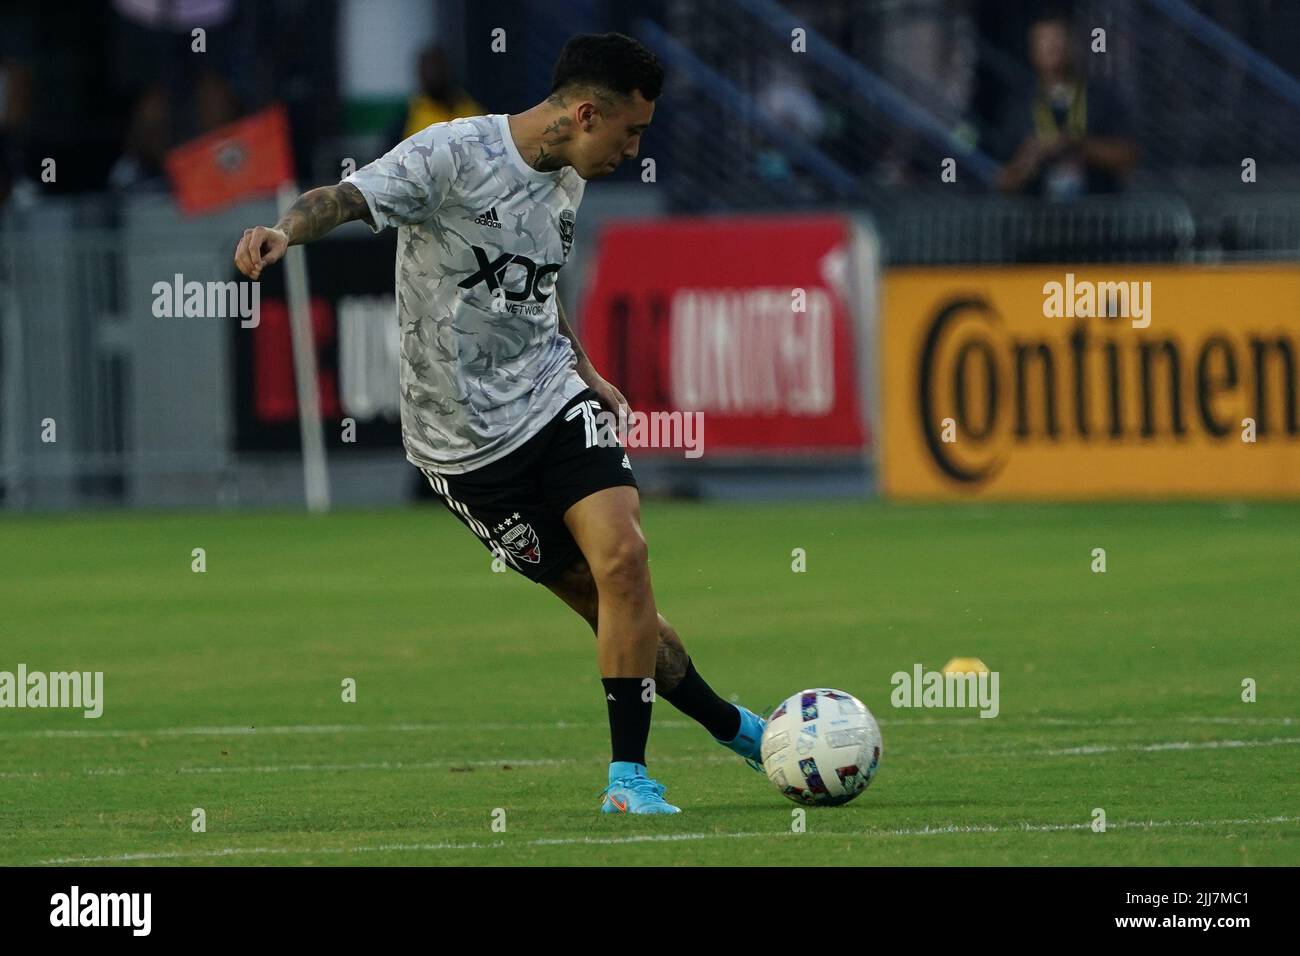 WASHINGTON, DC, USA - 23 JULY 2022: DC United new signing D.C. United midfielder Martin Rodriguez (77) warms up before a MLS match between D.C United and C.F. Montreal, on July 23, 2022, at Audi Field, in Washington, DC. (Photo by Tony Quinn-Alamy Live News) Stock Photo